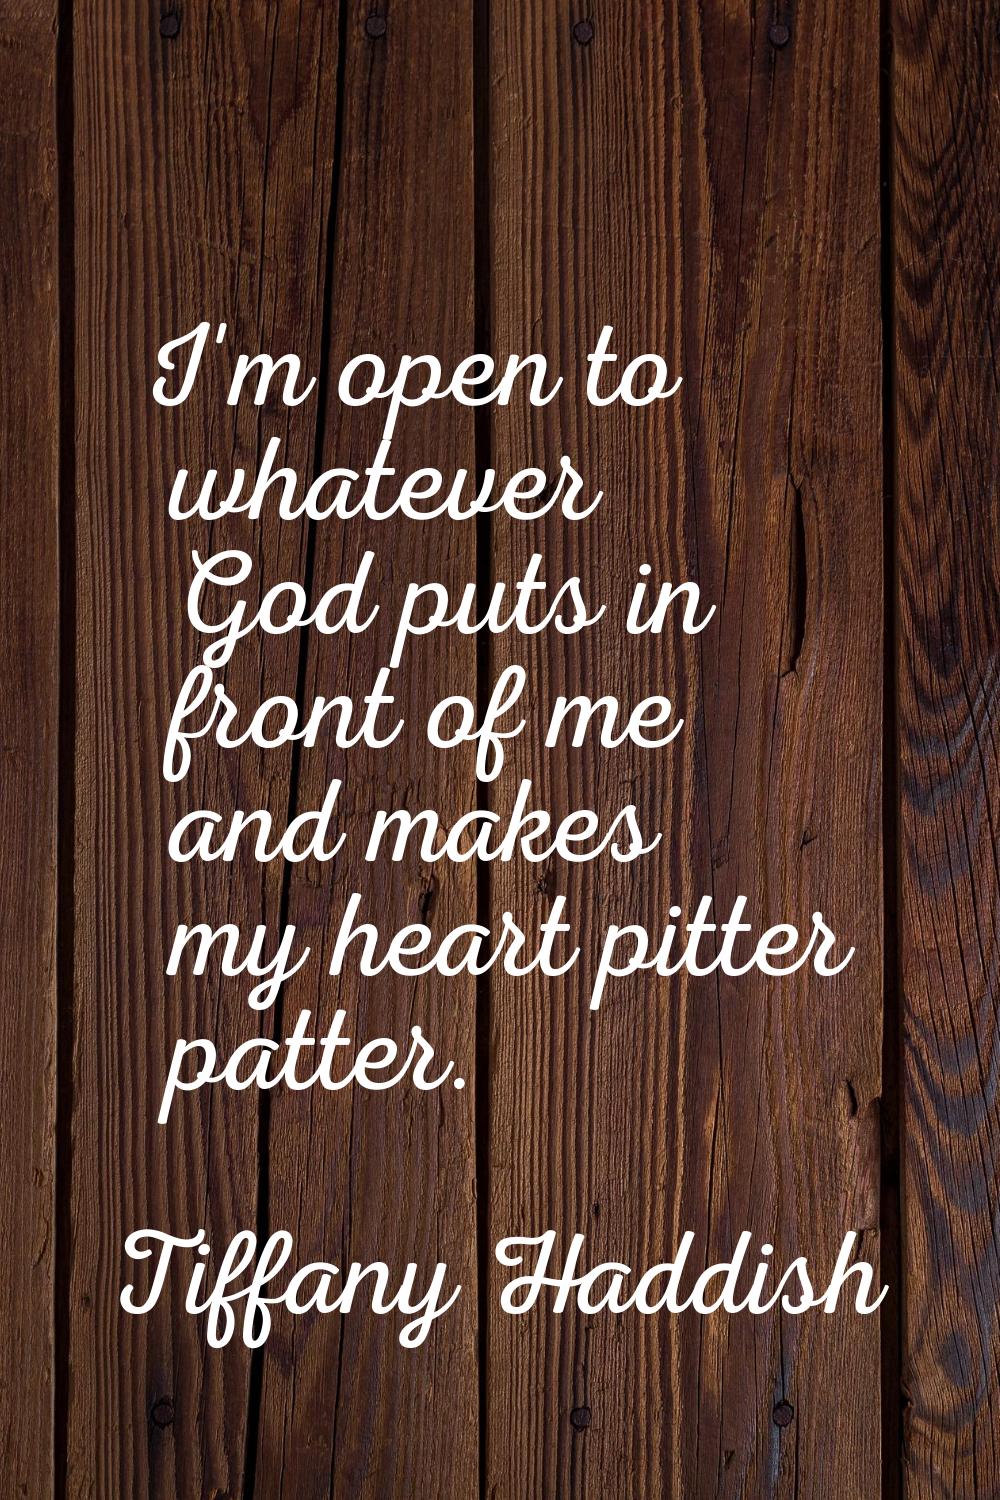 I'm open to whatever God puts in front of me and makes my heart pitter patter.